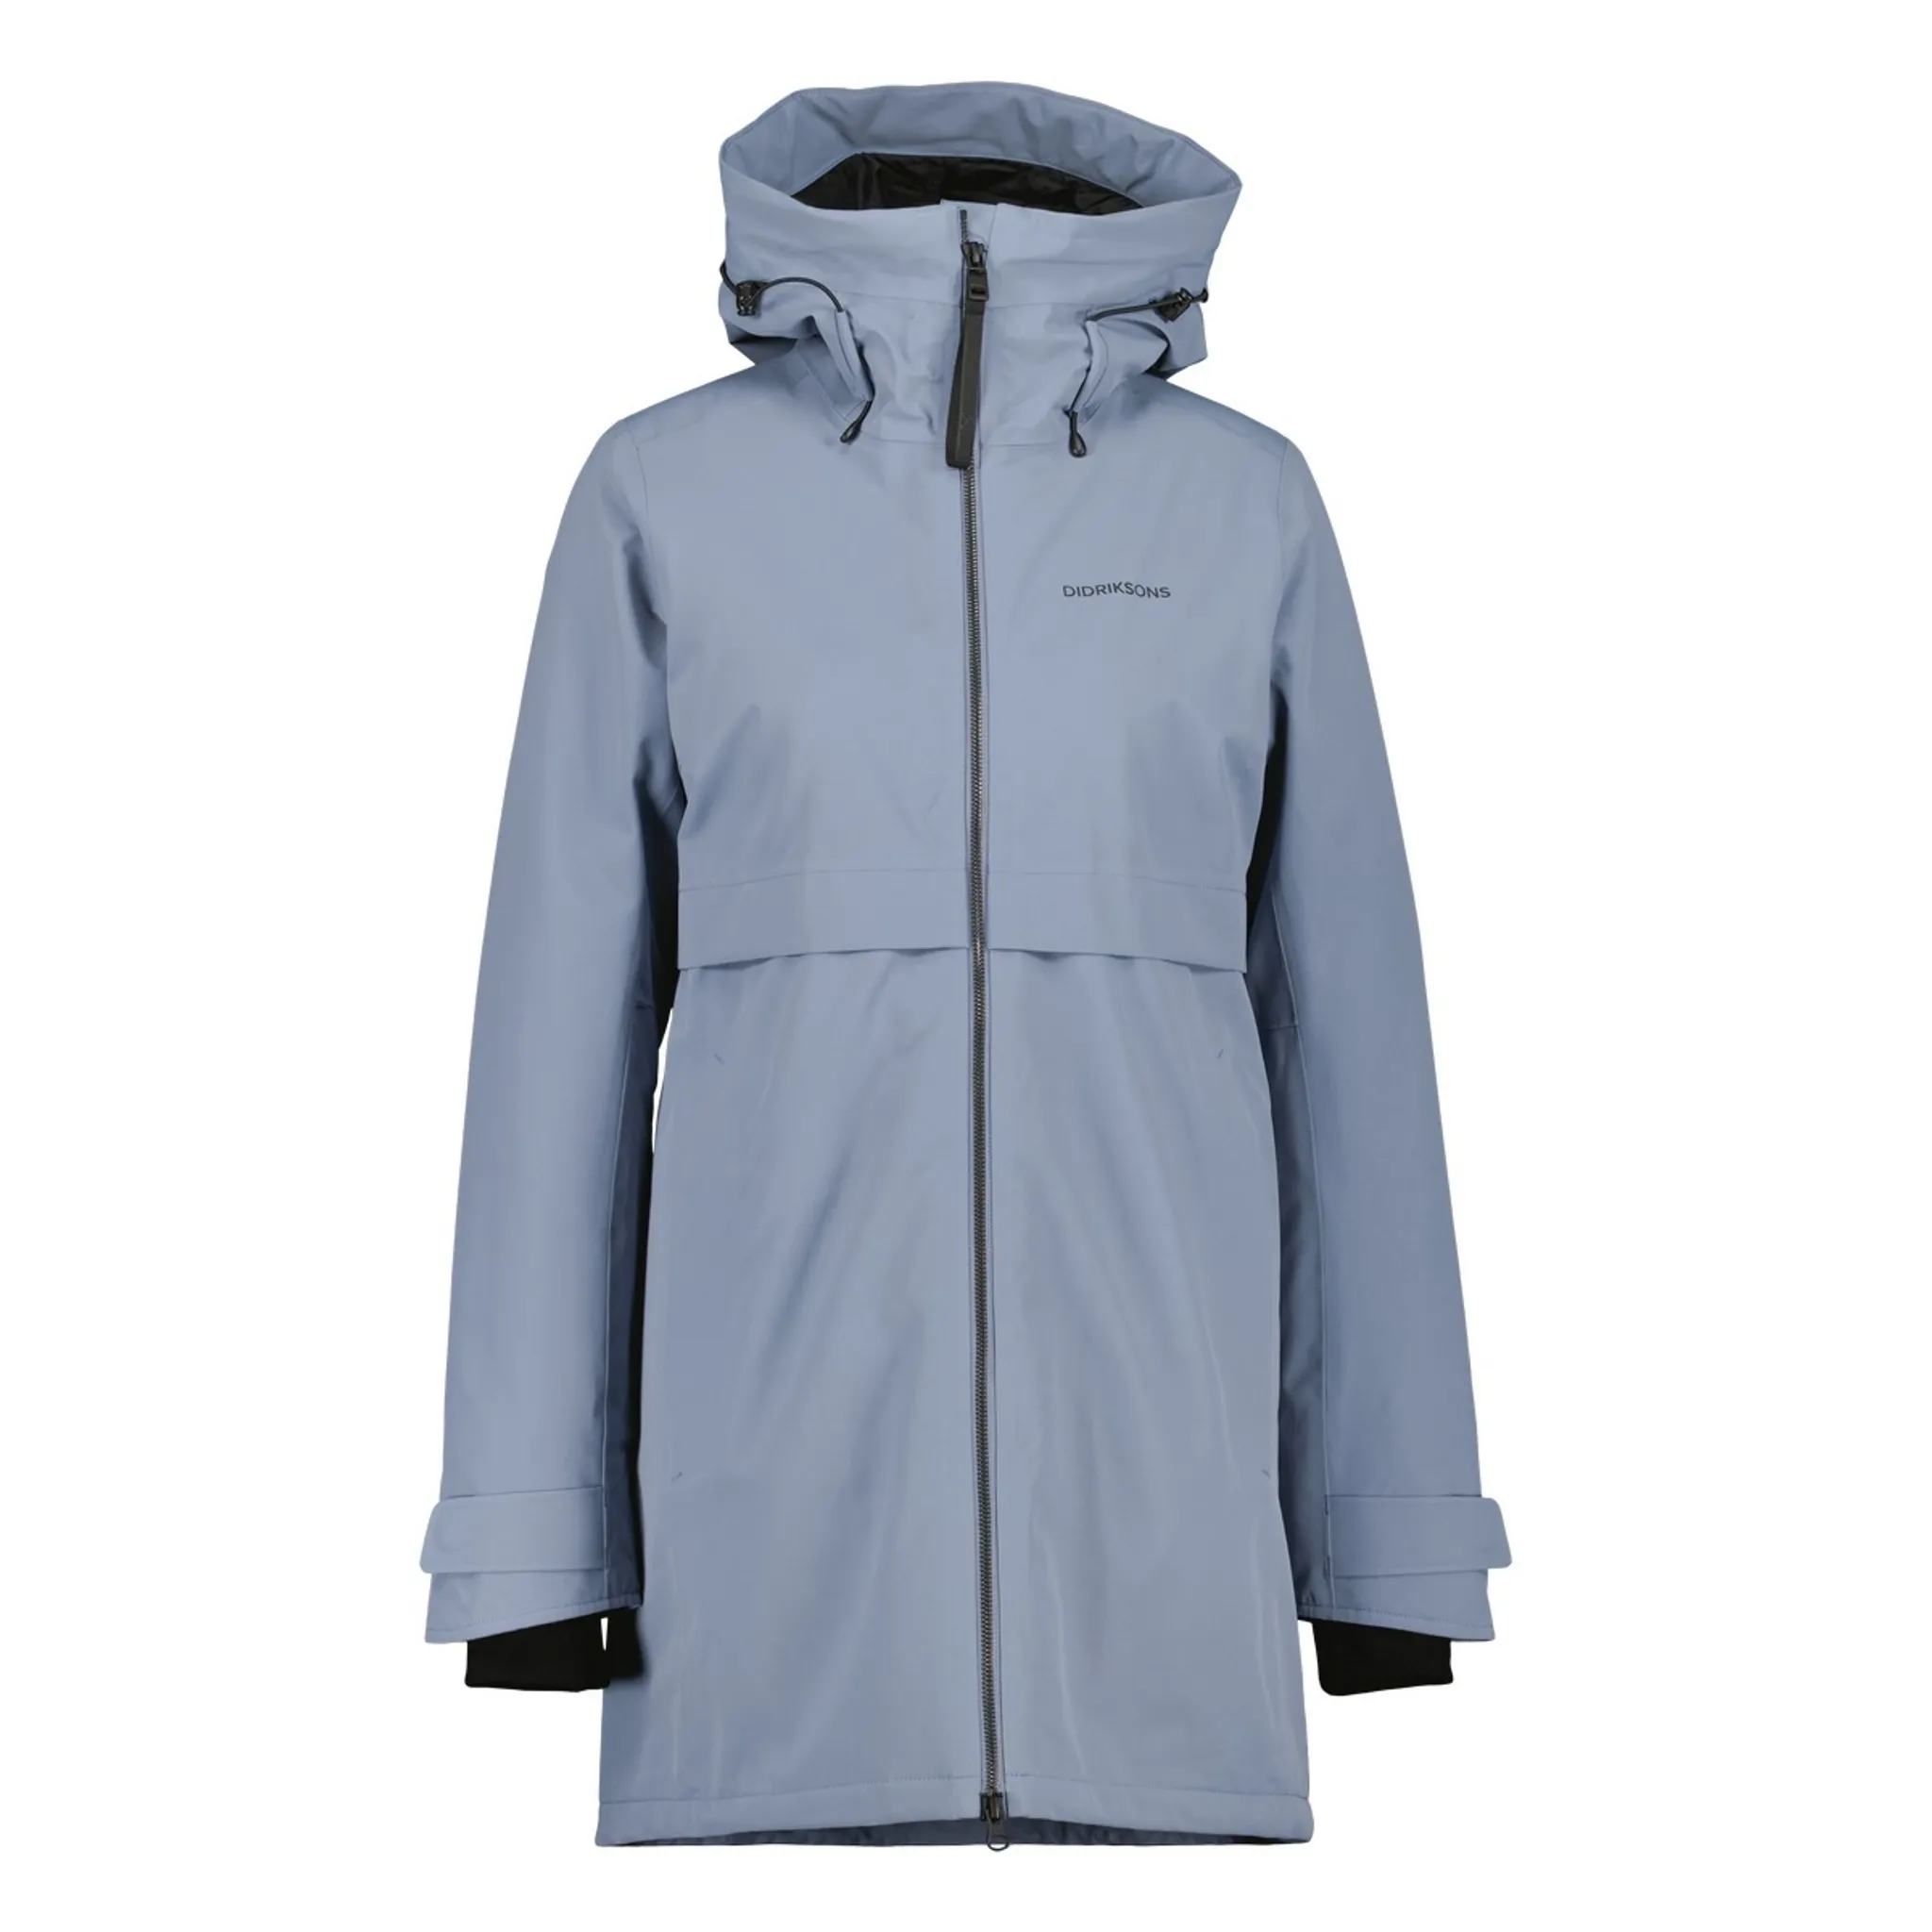 46 5 WNS G05 Helle G05 Didriksons Parka